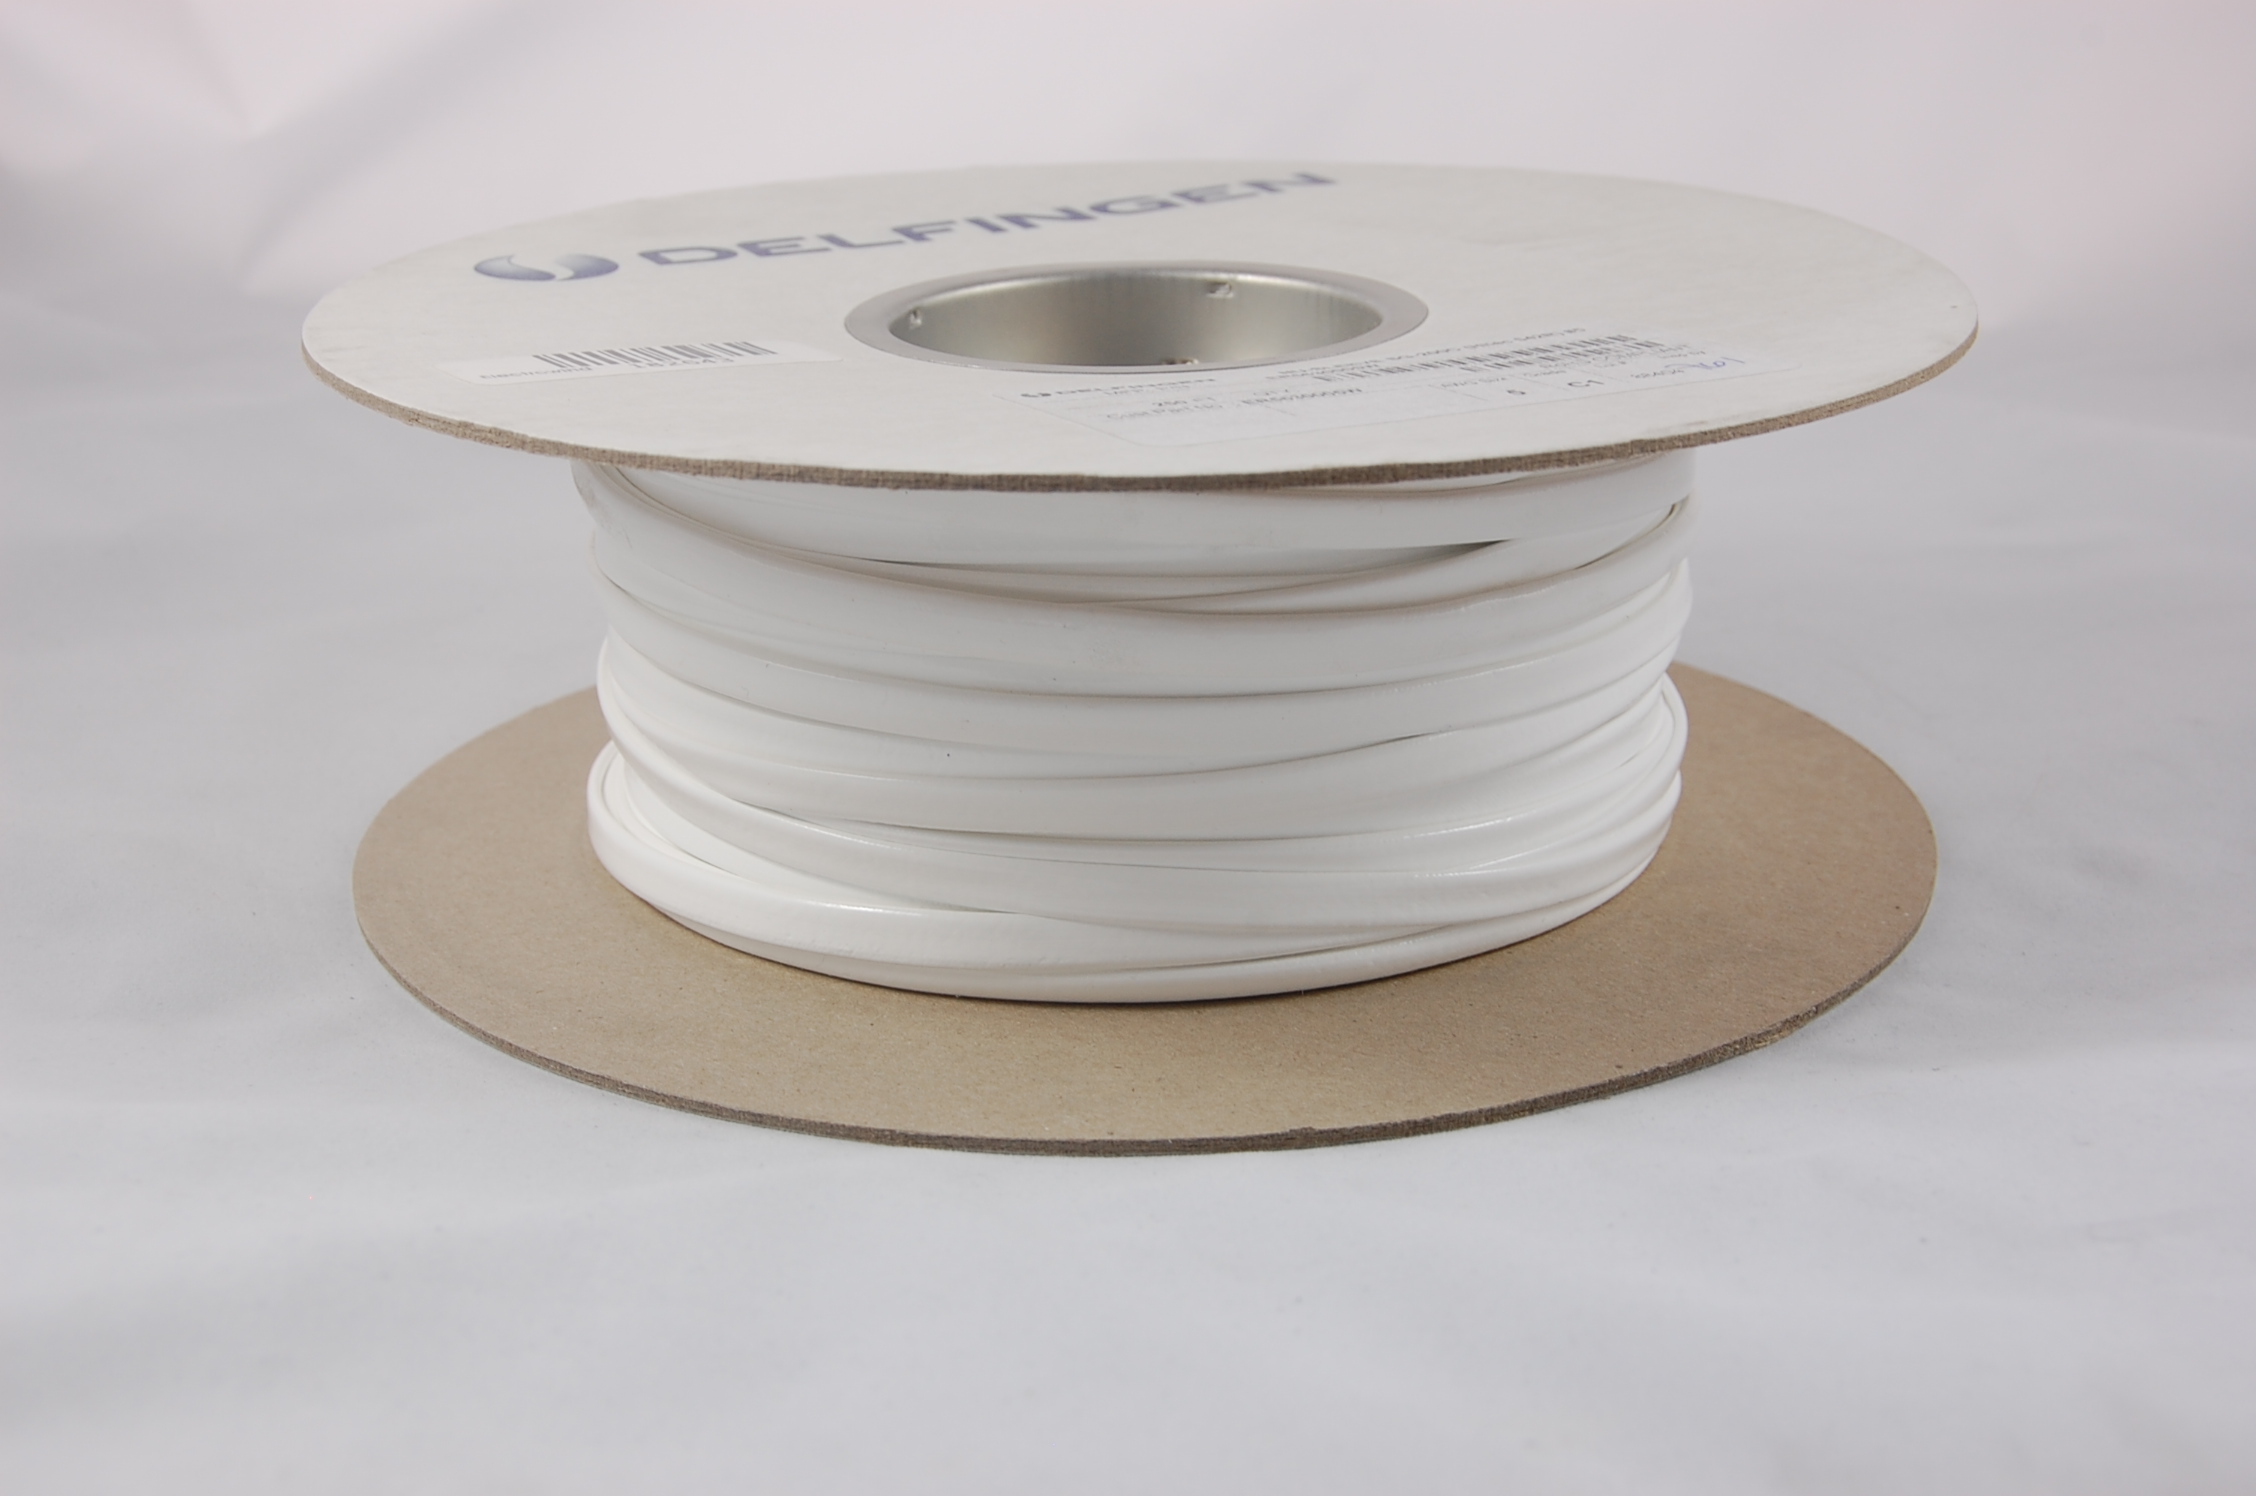 #4 AWG NU-SLEEVE SG-200 C-1 (2500V) Silicone Rubber Coated Braided Fiberglass Sleeving (542F) 200°C, white, 250 FT per spool